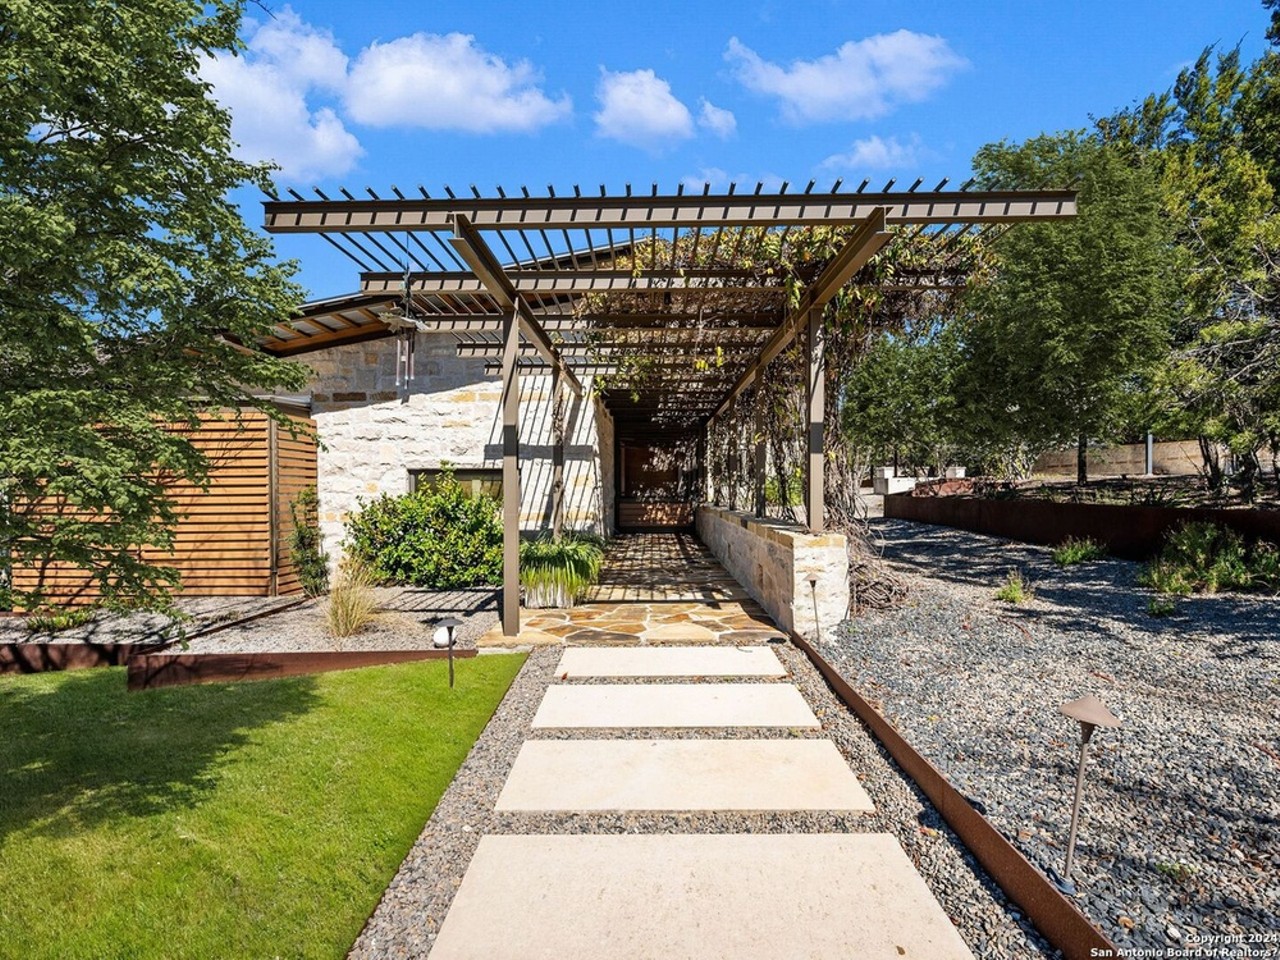 This eco-friendly San Antonio home for sale was designed by the AT&T Center's architects